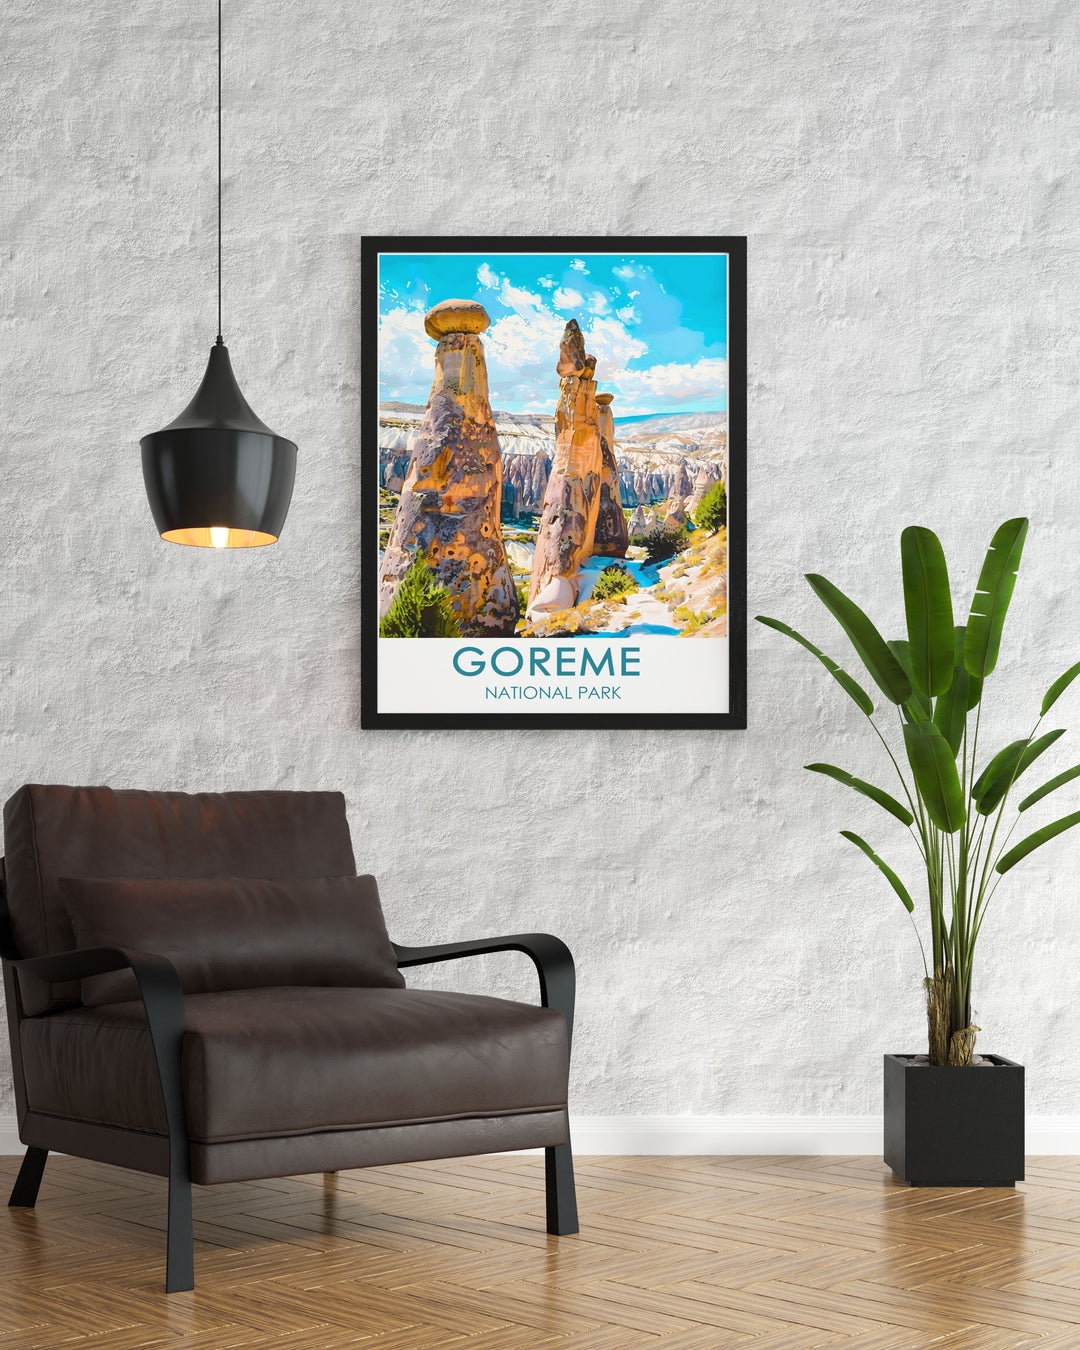 The detailed illustration of Goreme National Parks Fairy Chimneys and the serene hot air balloons creates a captivating piece of wall art, celebrating the unique natural beauty of Cappadocia, Turkey, and bringing a sense of adventure to your decor.